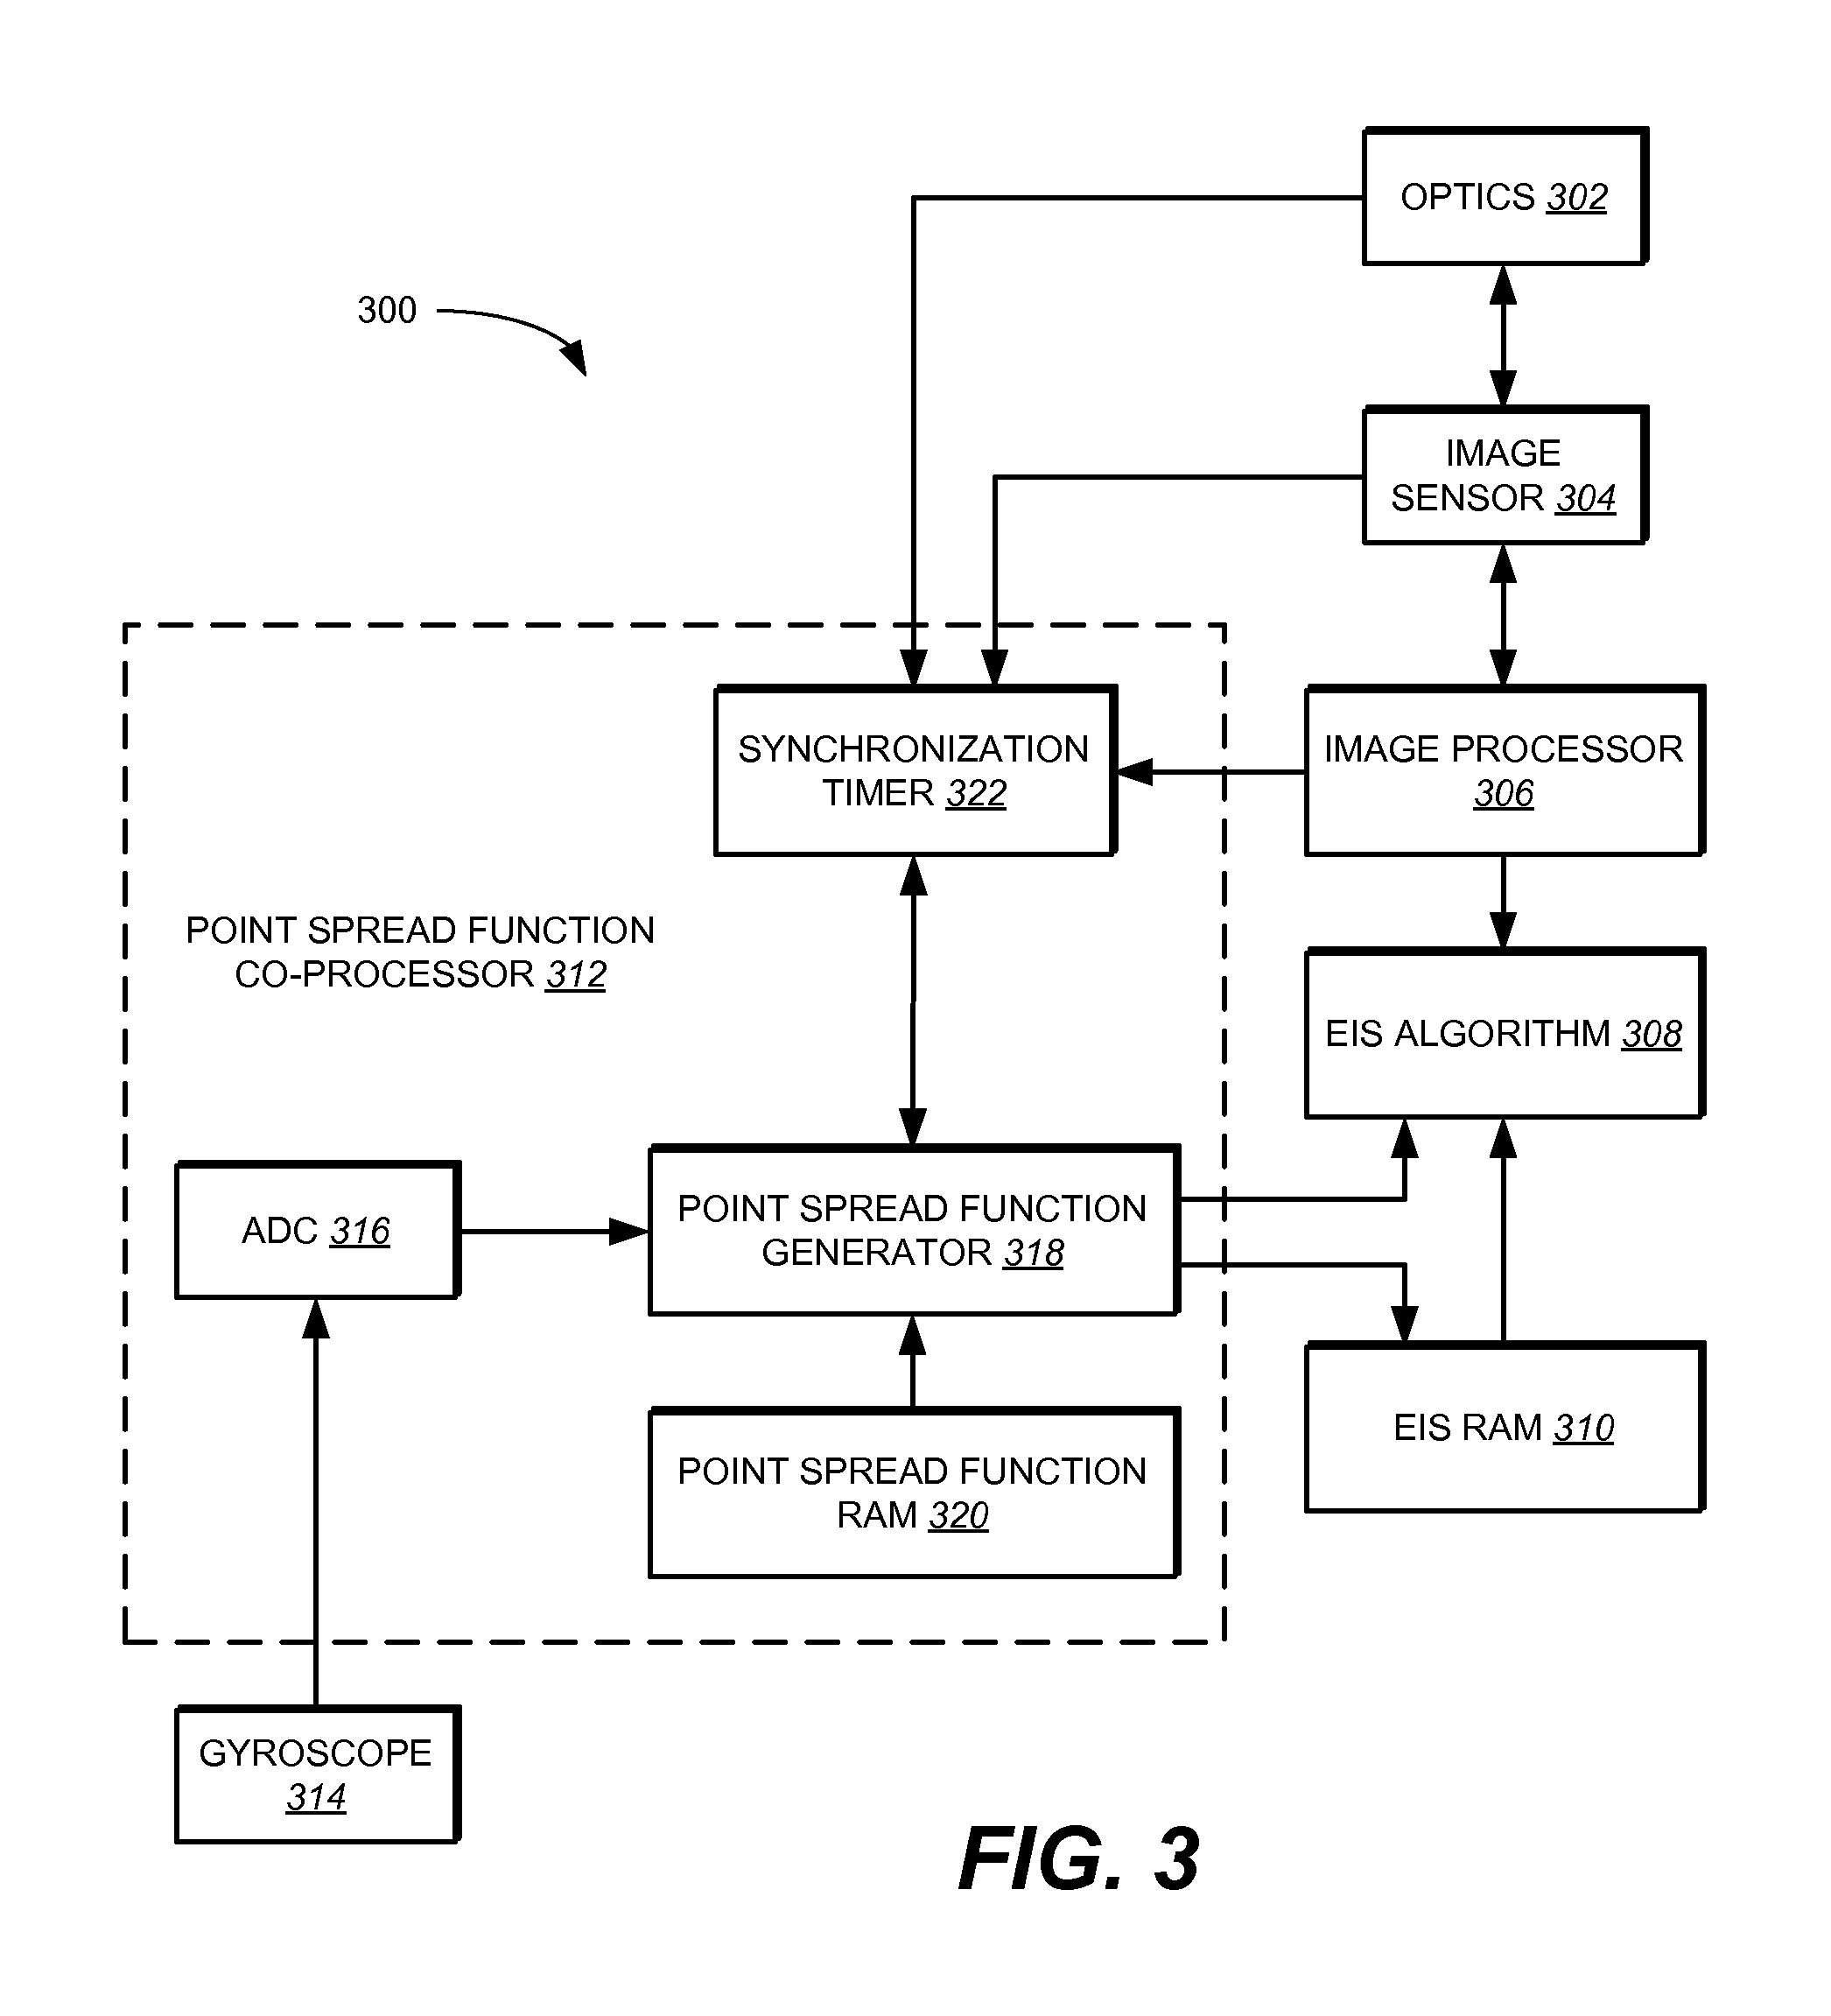 Method and apparatus for producing a sharp image from a handheld device containing a gyroscope